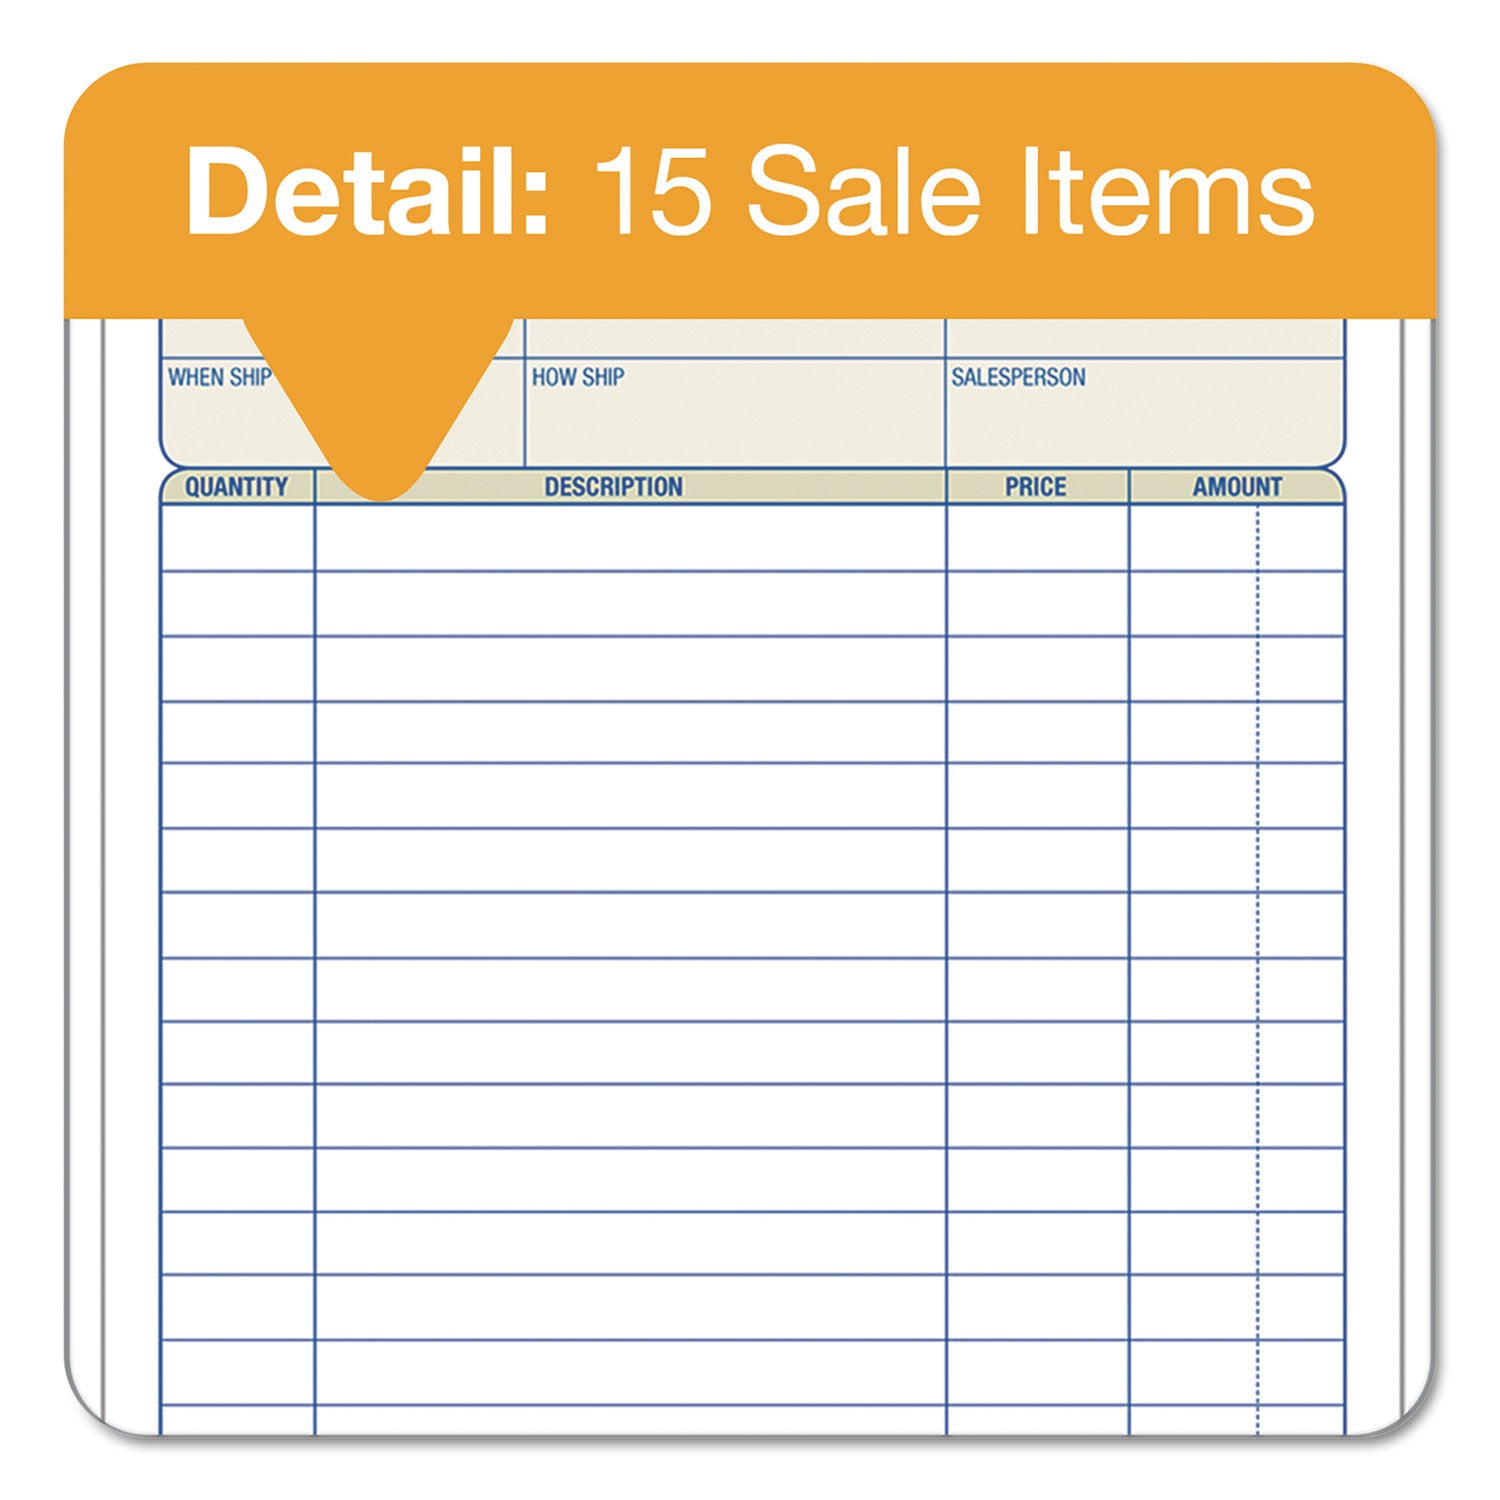 Sales Order Book, Two-Part Carbonless, 7.94 x 5.56, 50 Forms Total - 